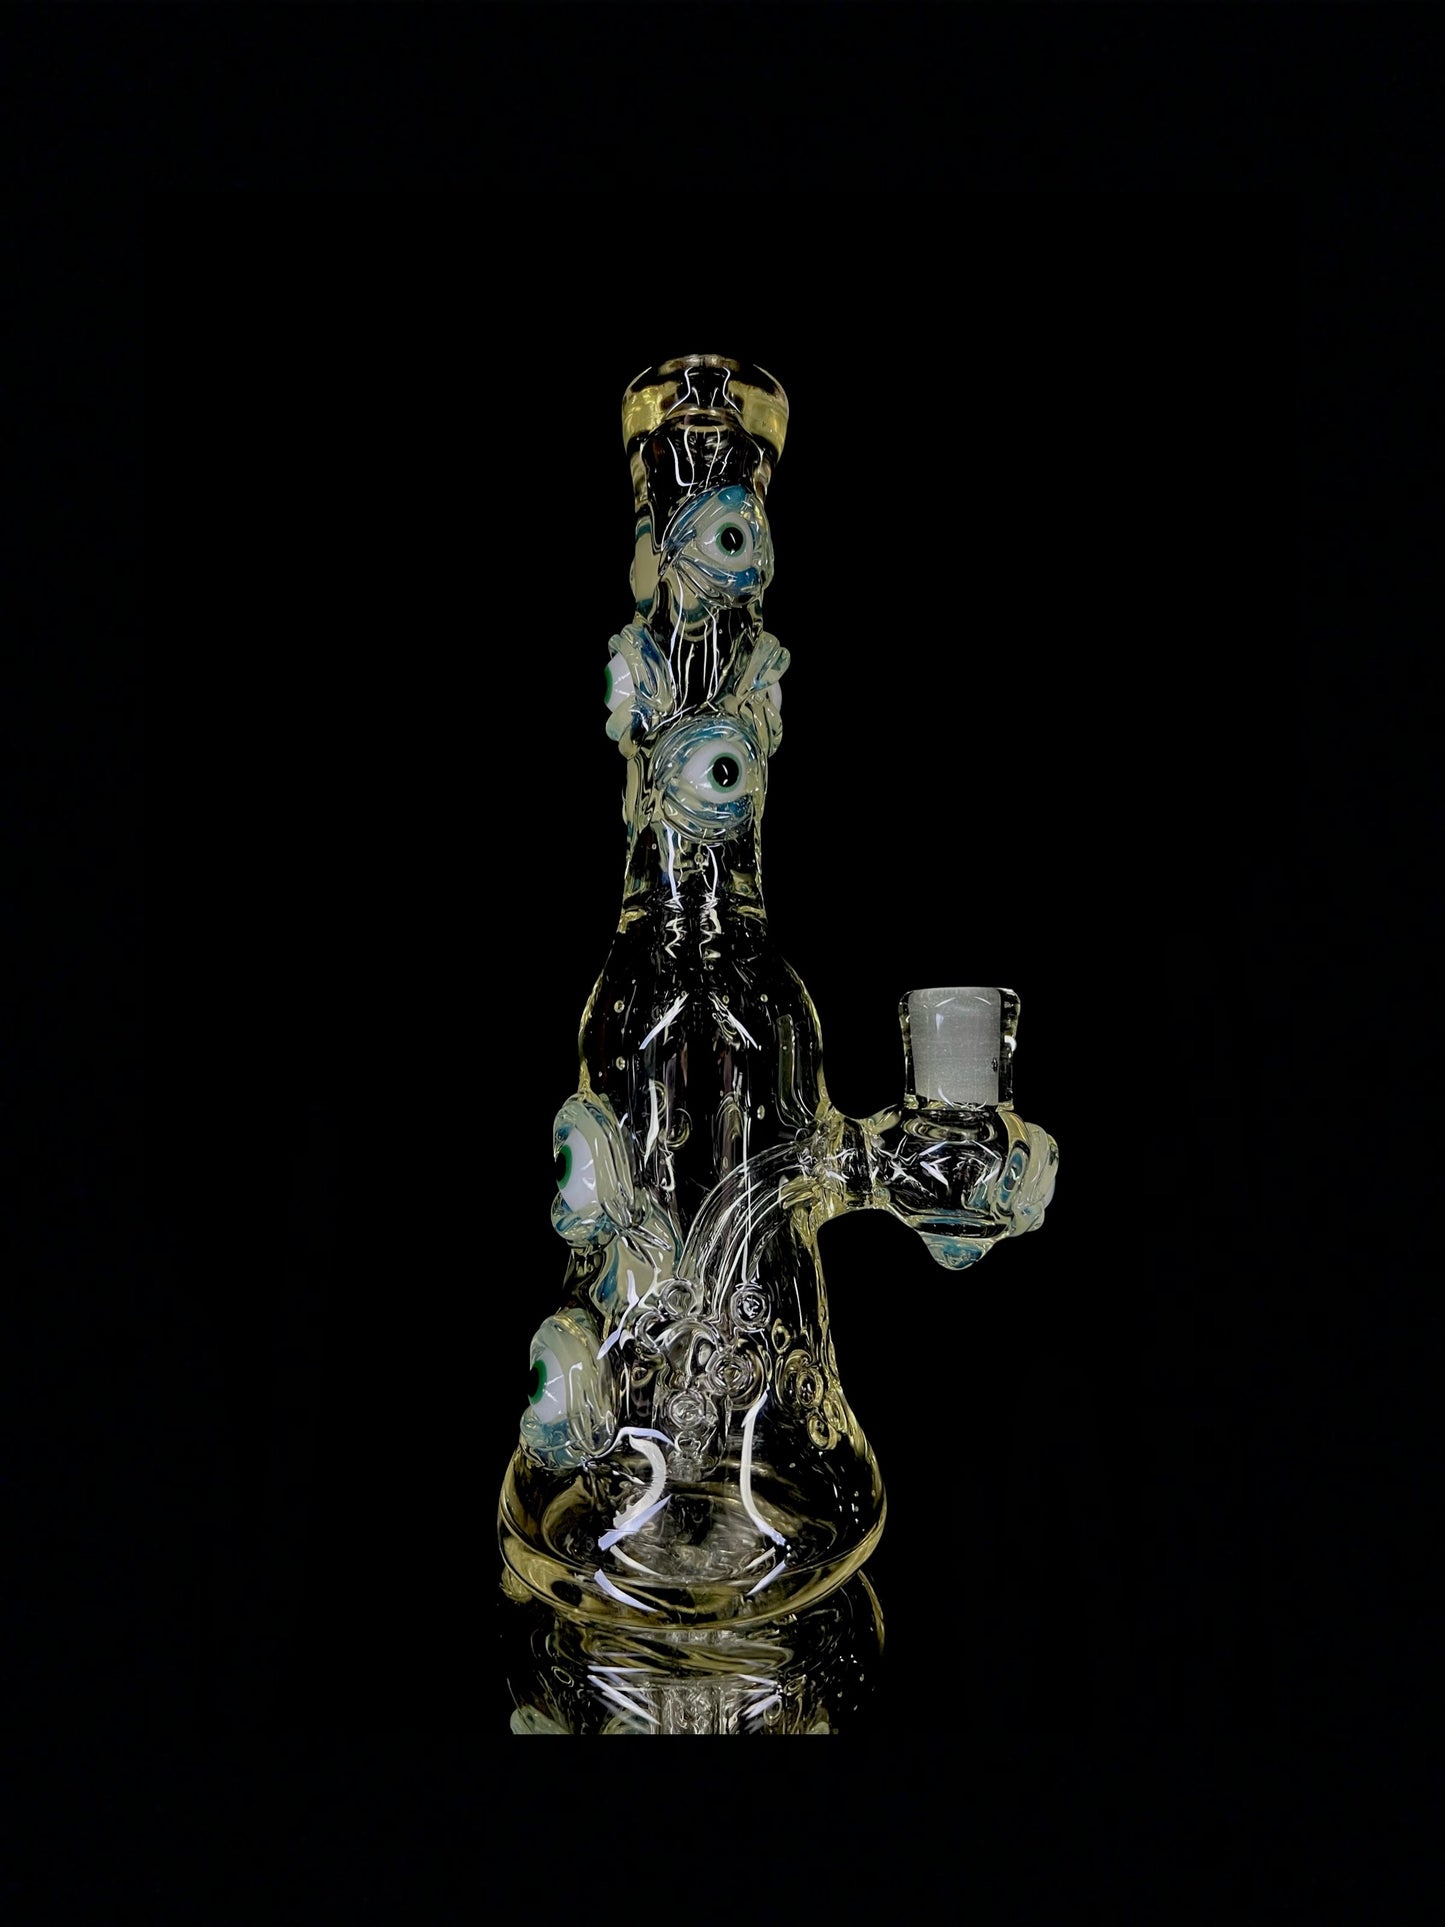 Serum (cfl) Argus with yoshi (cfl) accents by Leviathan Glass